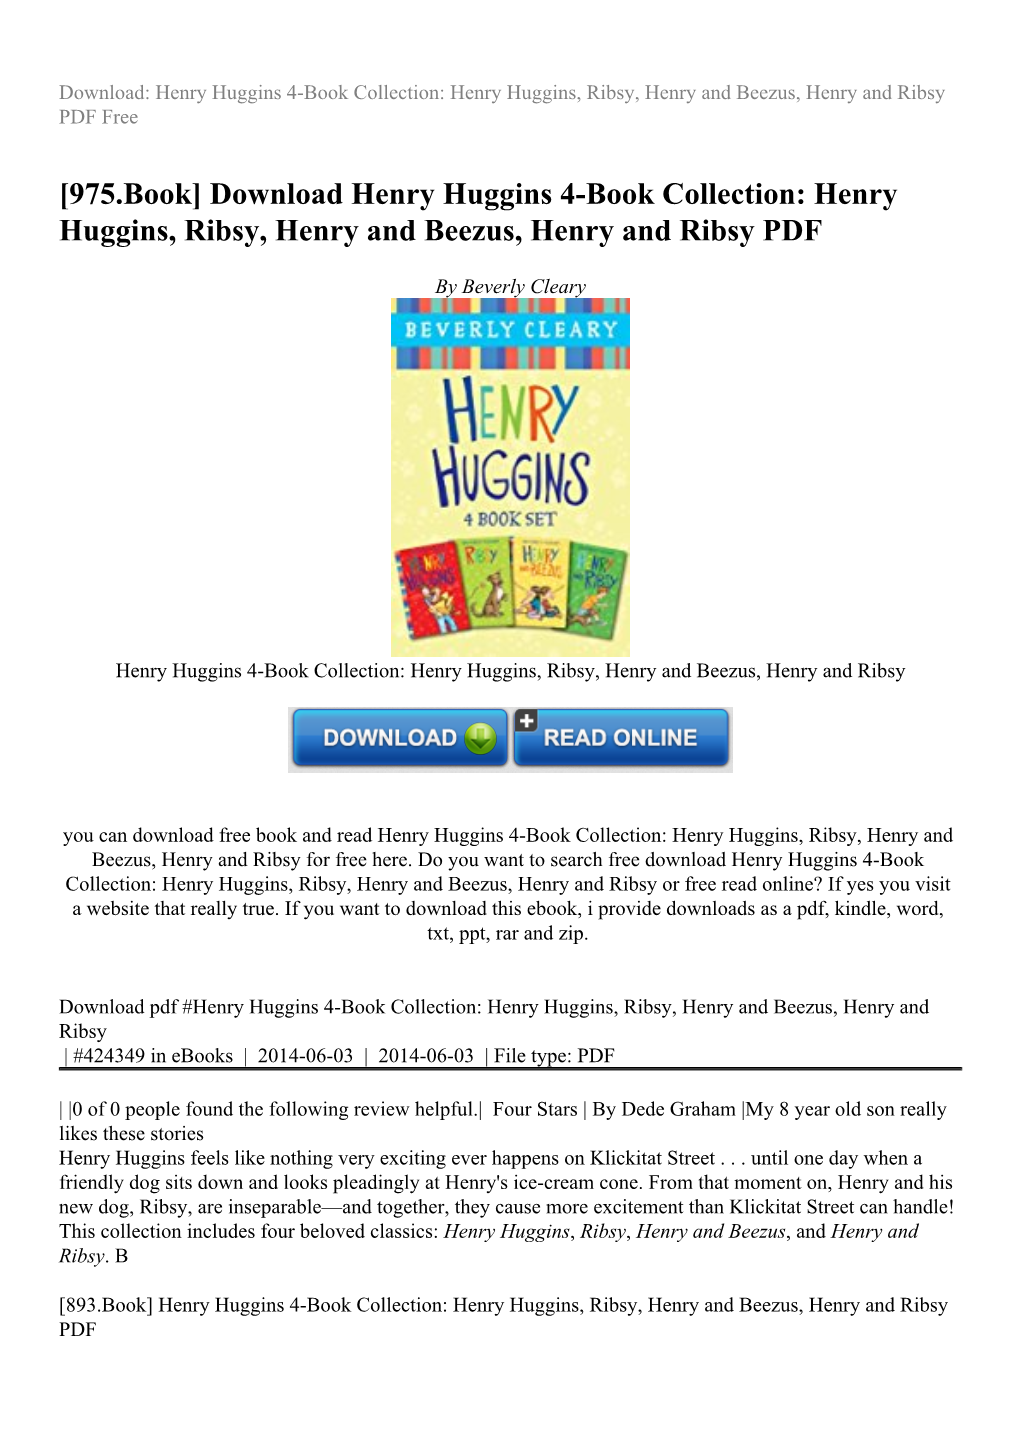 Henry Huggins, Ribsy, Henry and Beezus, Henry and Ribsy PDF Free